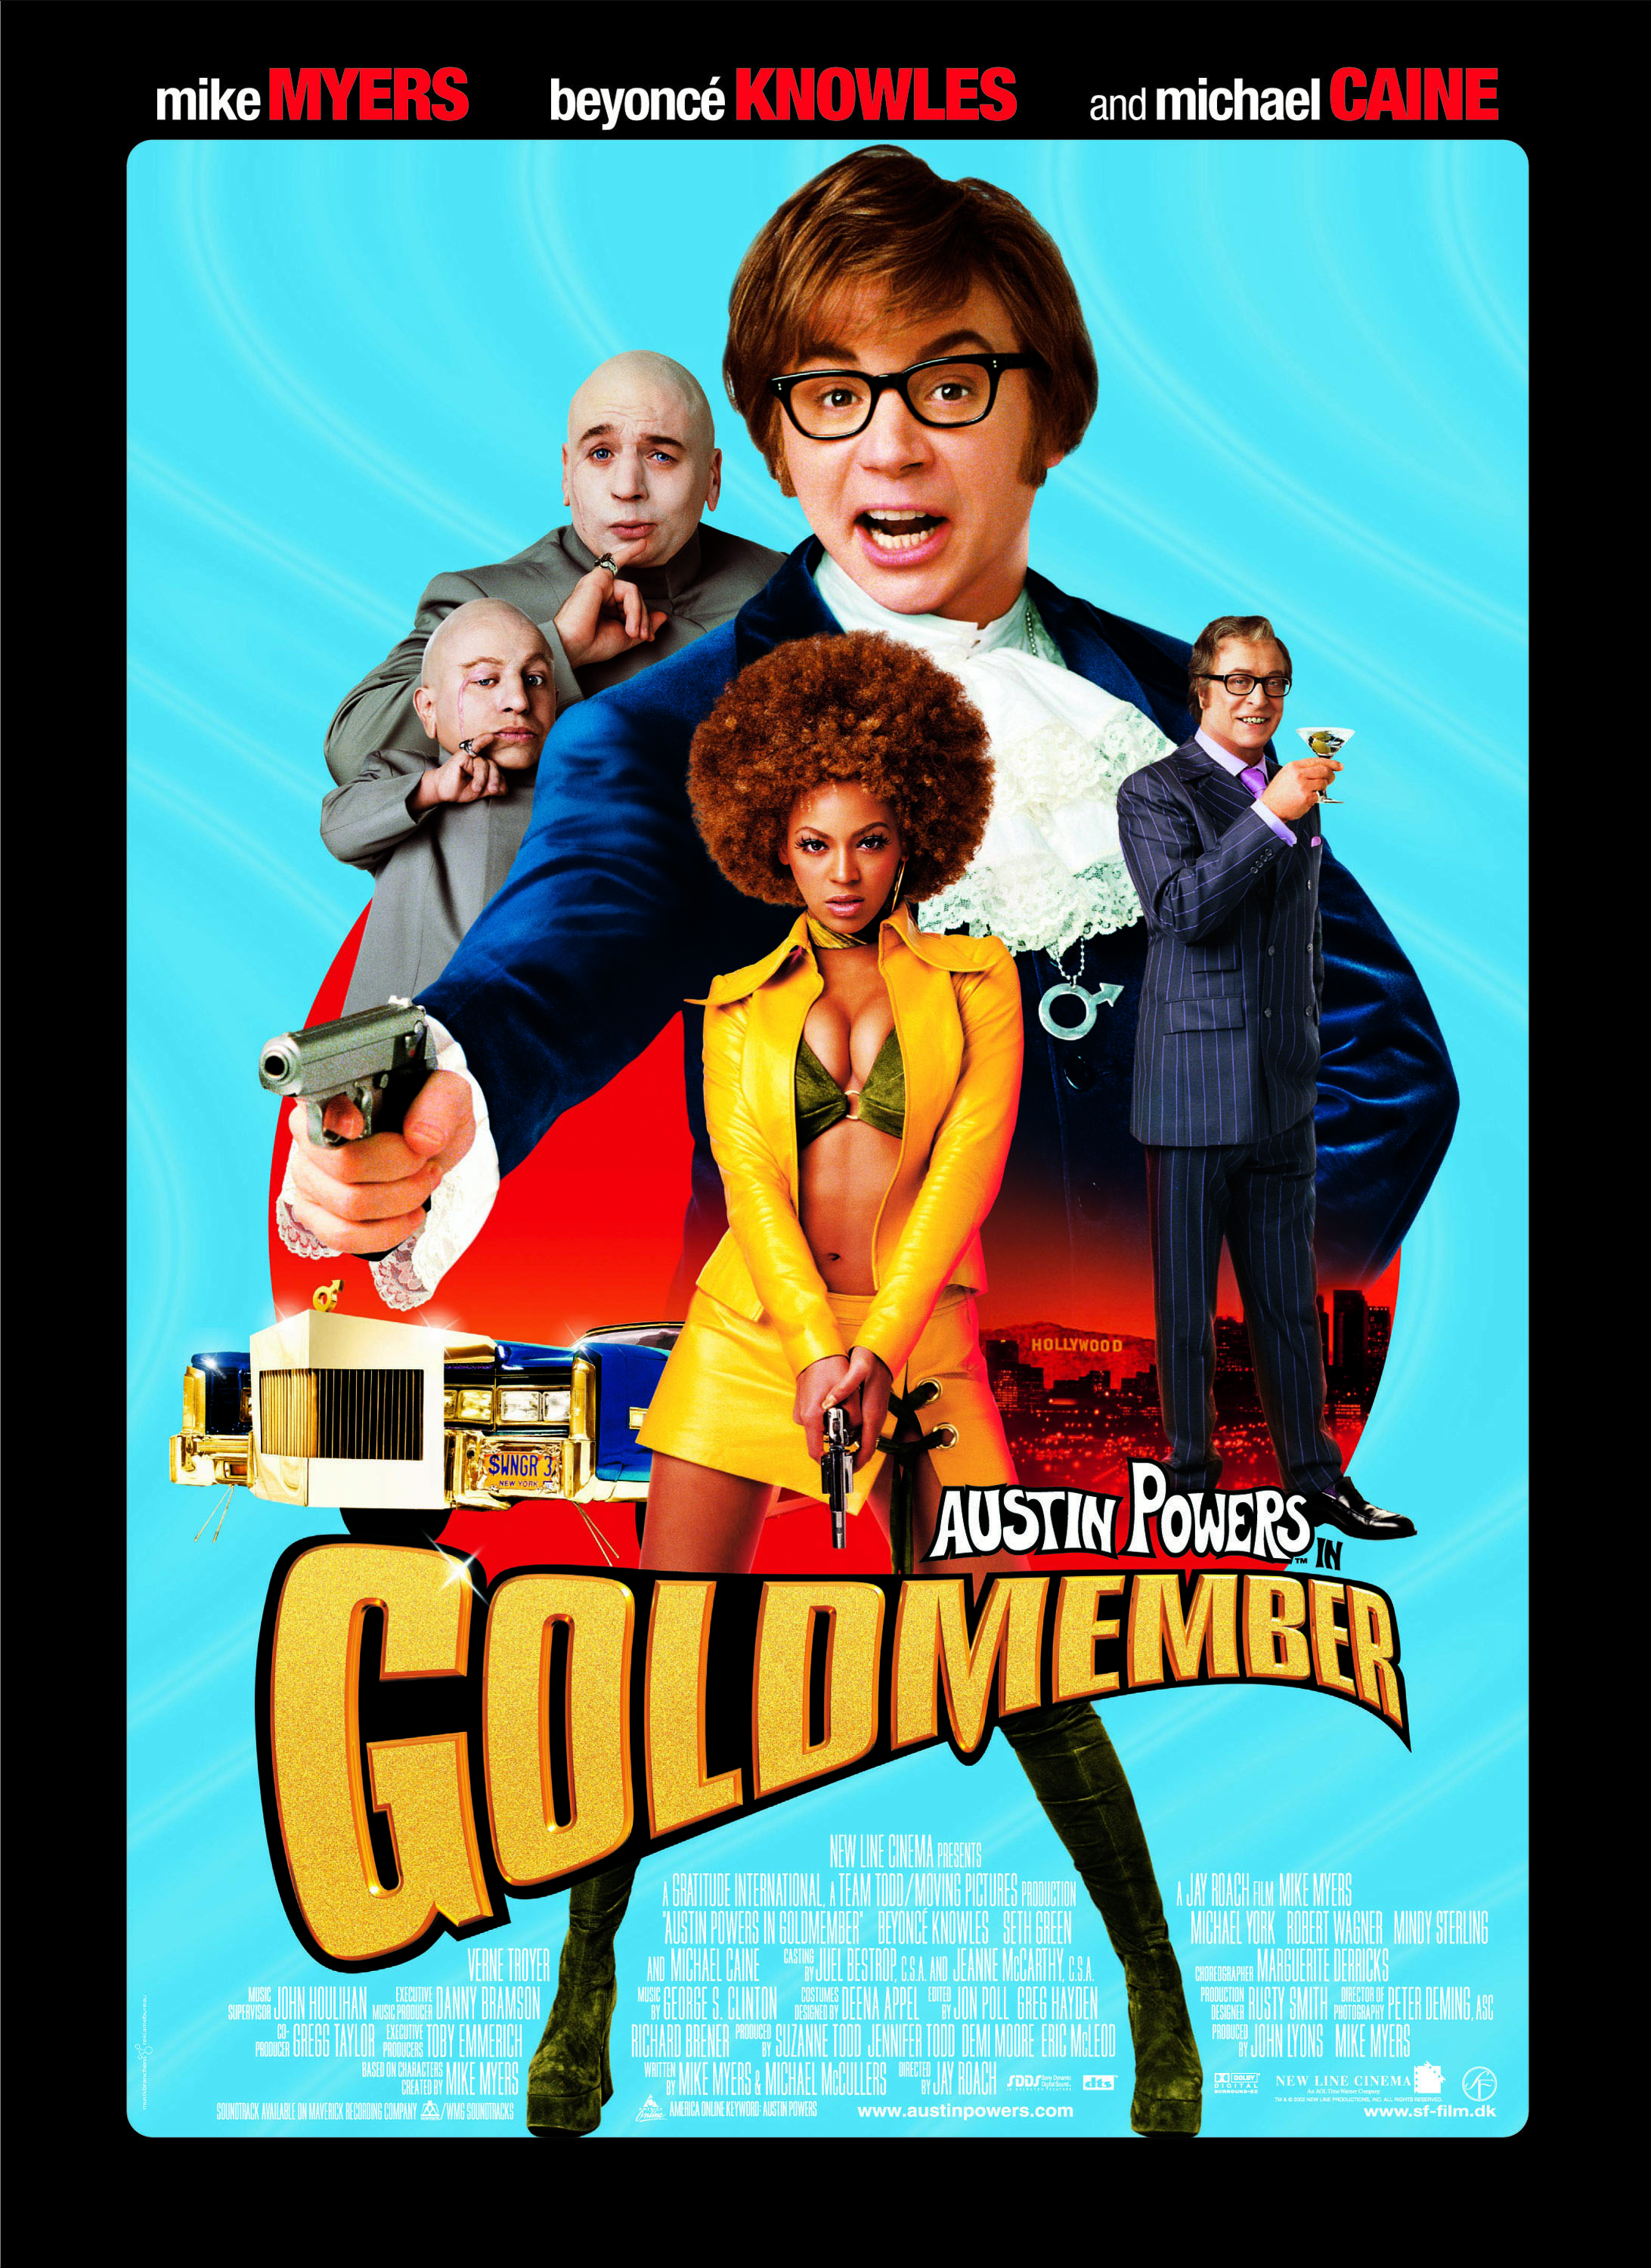 movie poster with beyonce in the front holding a gun pointing down